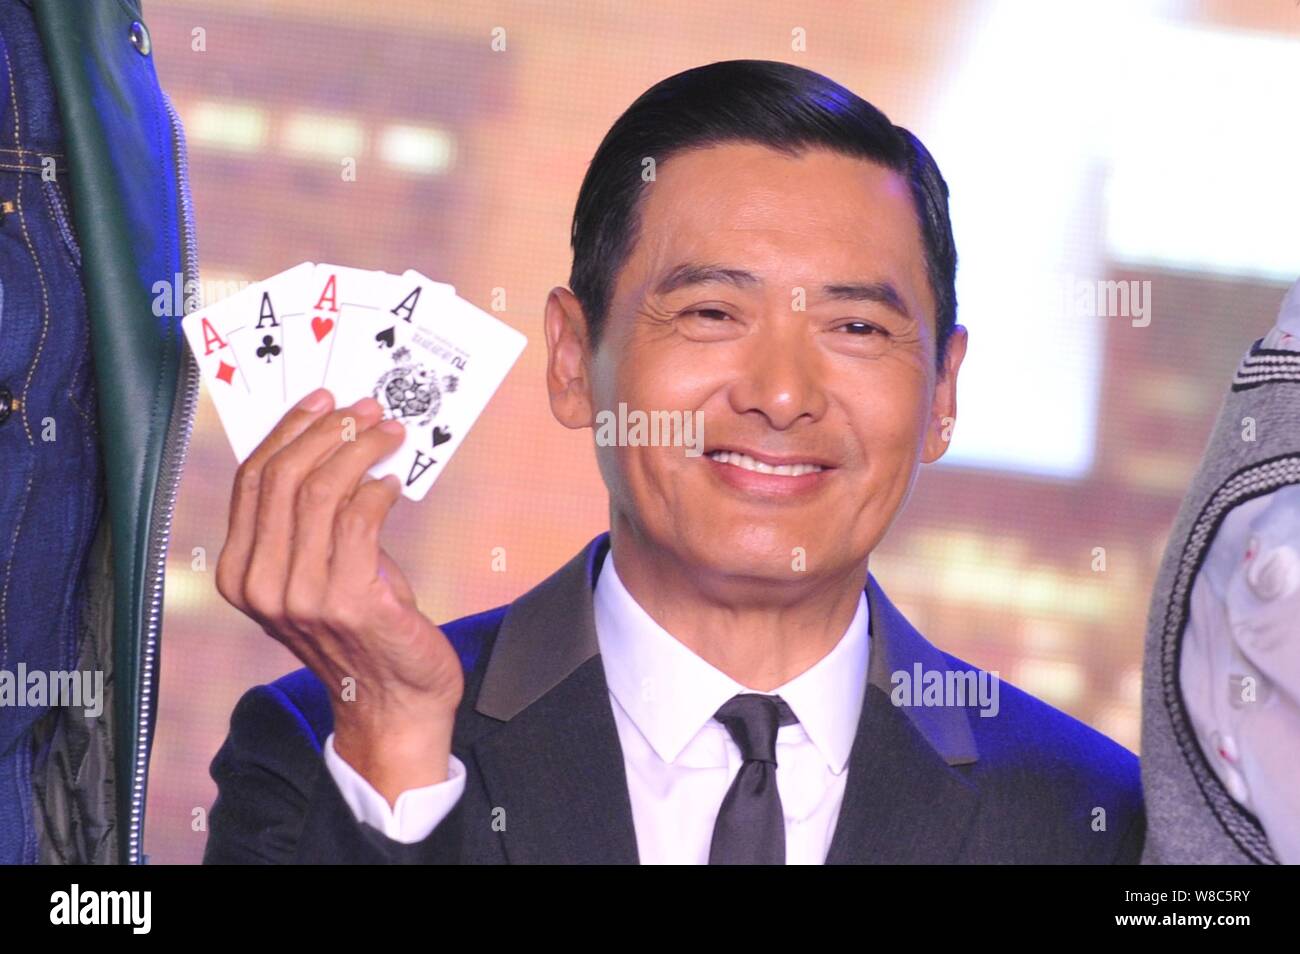 Chow Yun Fat From Vegas to Macau movie, Gold Plated Playing Cards, Gold  letterings. Bendable, waterproof, washable, fine matte. Cardistry,  illusionist, magician. PVC plastic. 周潤發, 澳门风云, Brand new, unsealed from  manufa